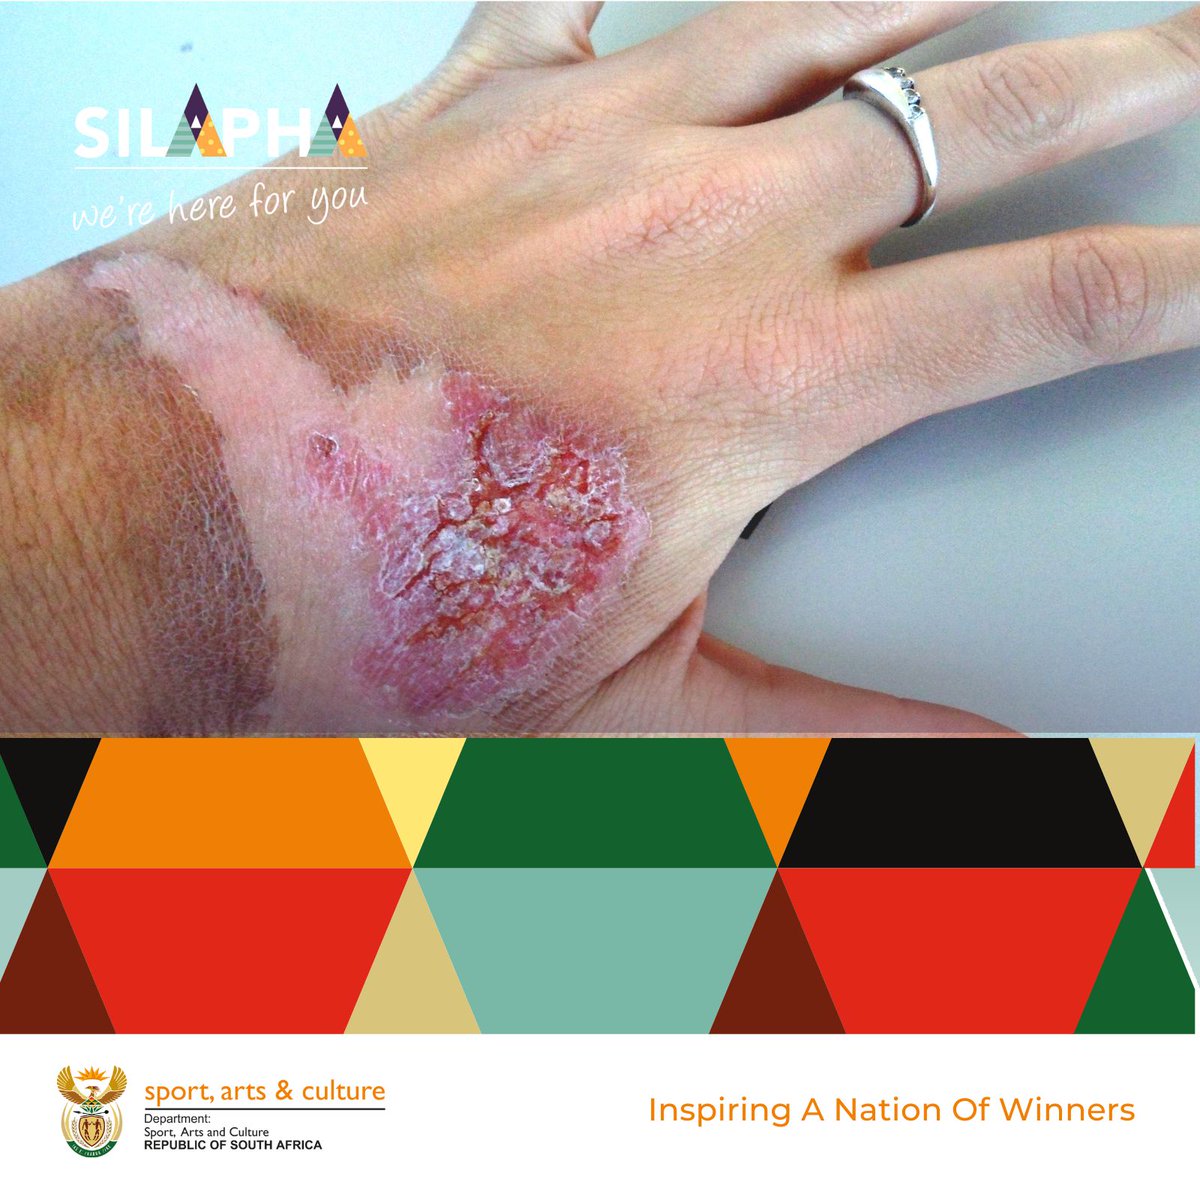 🚑 National Burns Awareness Week is here to remind us of the risks. Artists & athletes, sign up for Silapha and receive support through recovery. You're not alone. dsac.myhealth360.co.za/sign-up/?cid=c… #Silapha #SilaphaWeAreHere4U